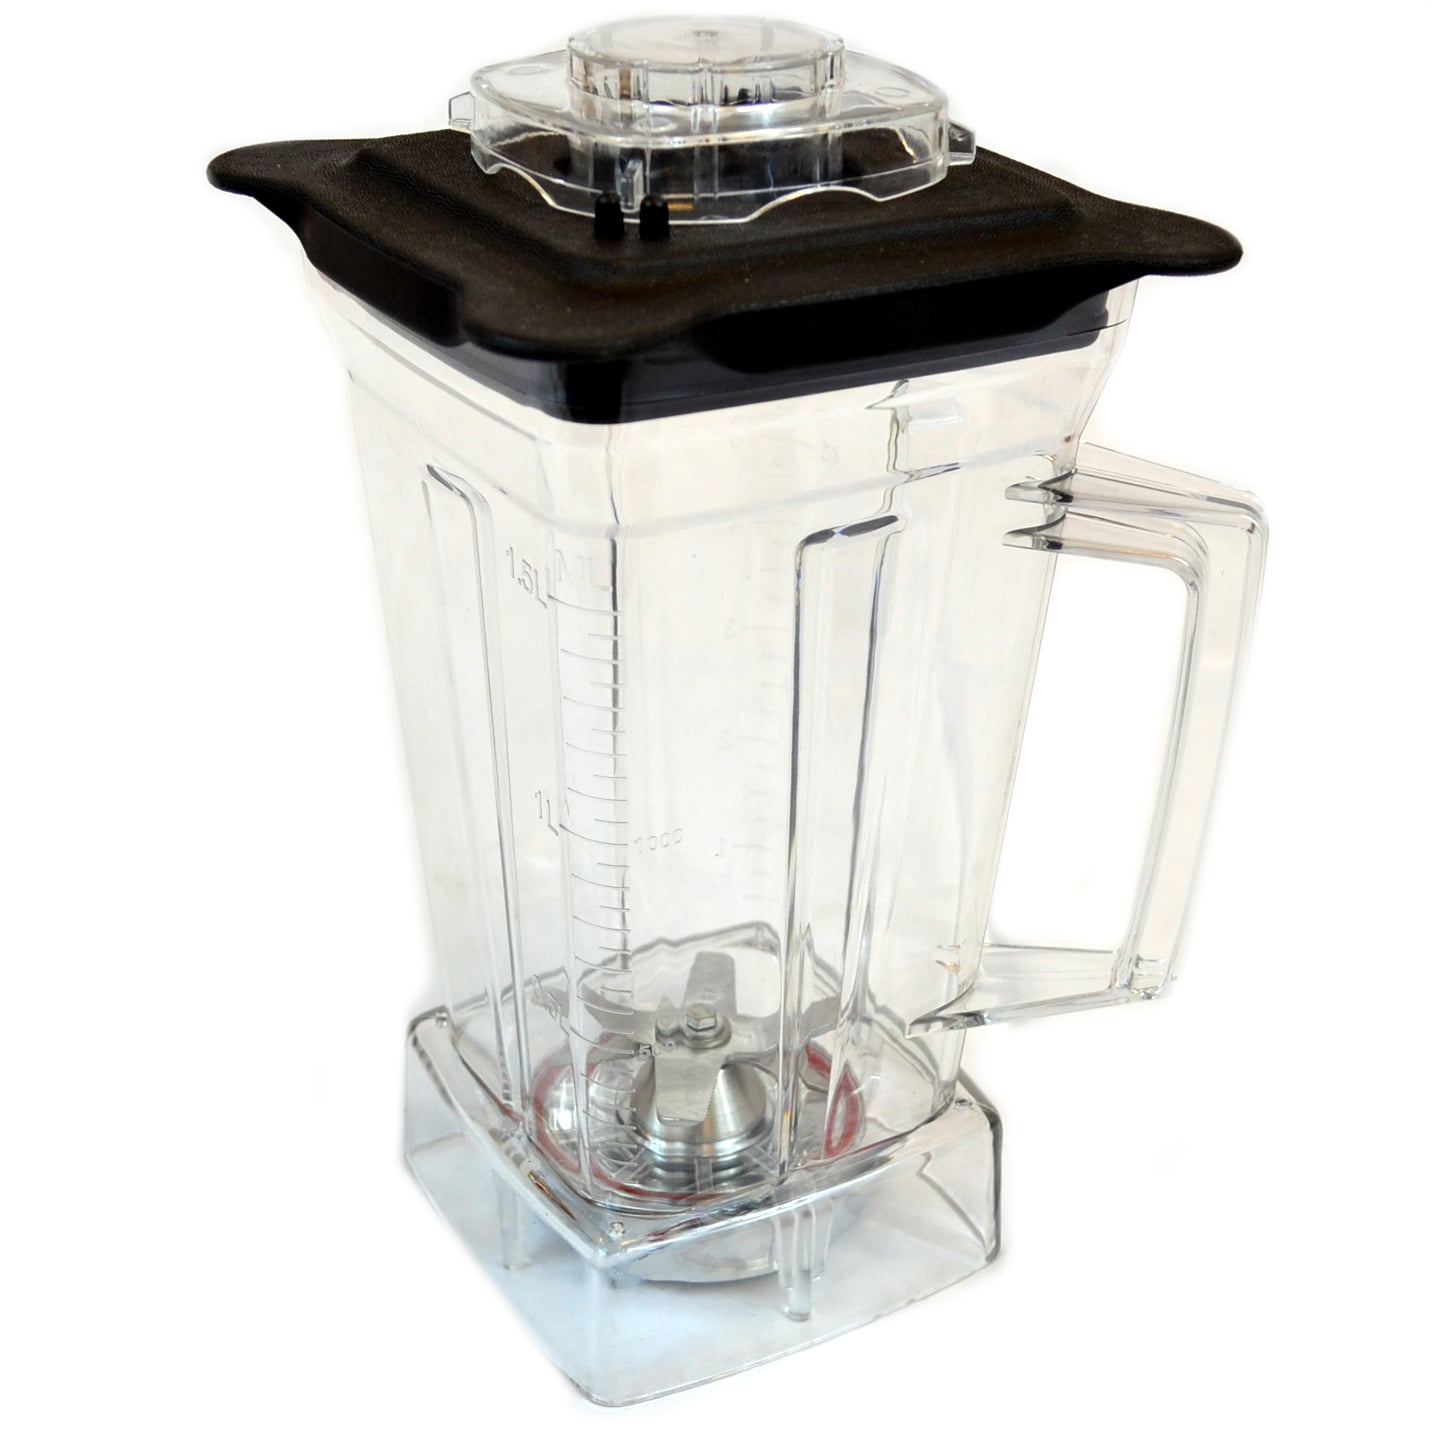 64oz Jar Container Replacement with Lid & Center Fill Cap Fits Vitamix Blenders 